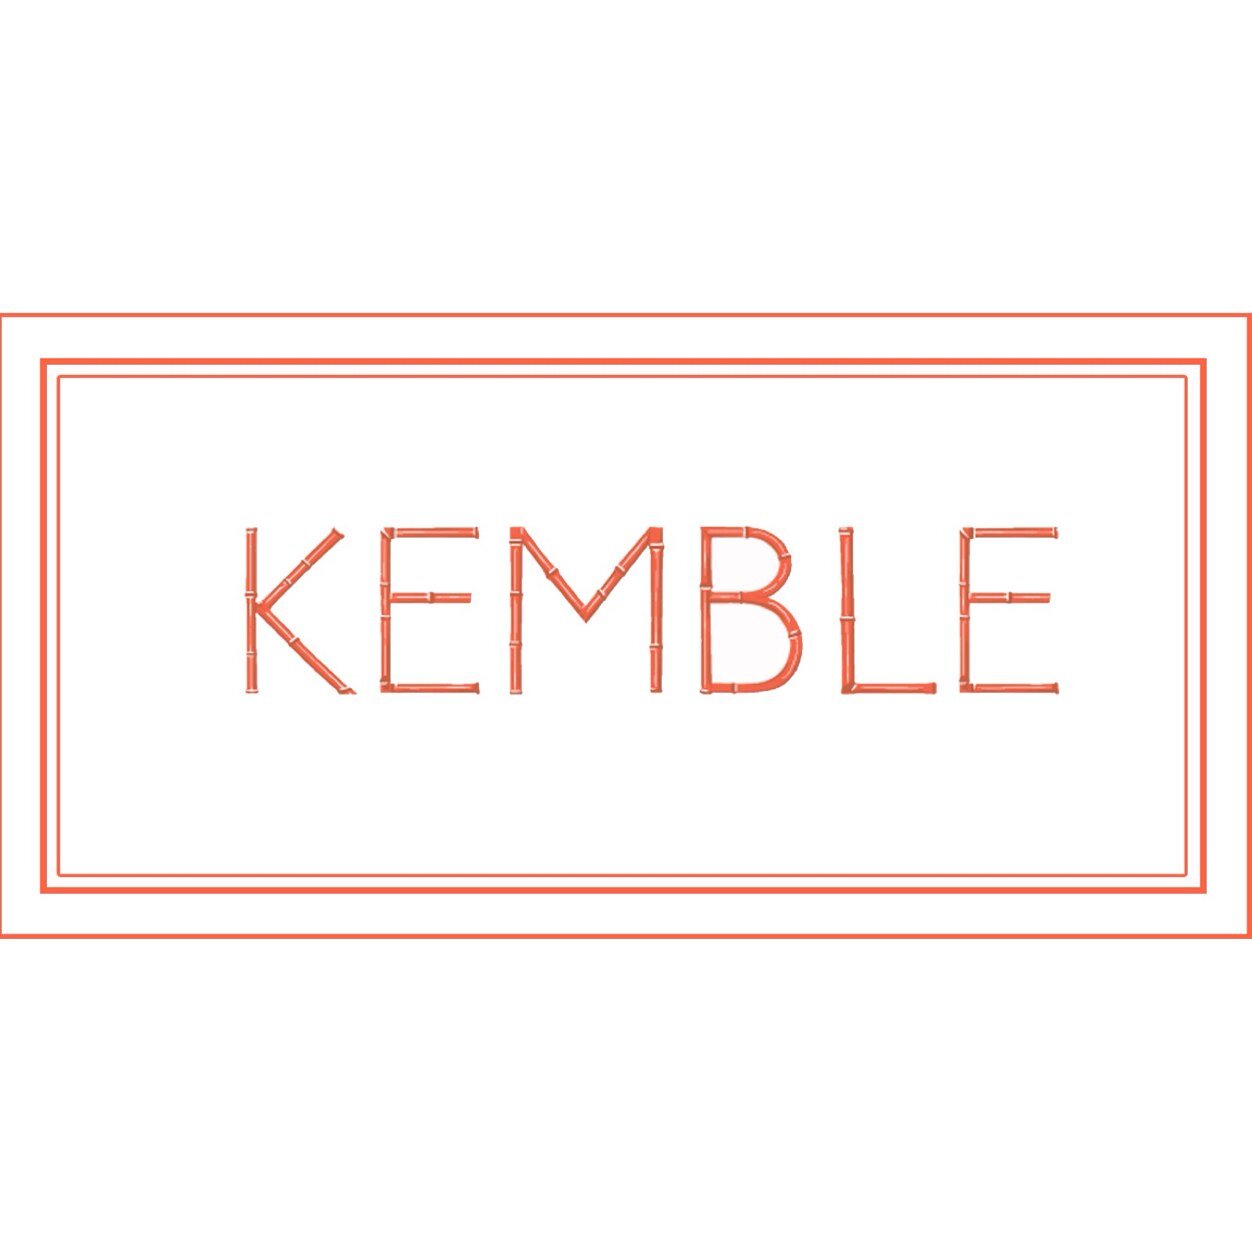 Kemble Interiors was founded in Palm Beach in 1982 by Mimi Maddock McMakin and our New York office is headed by her daughter, Celerie Kemble